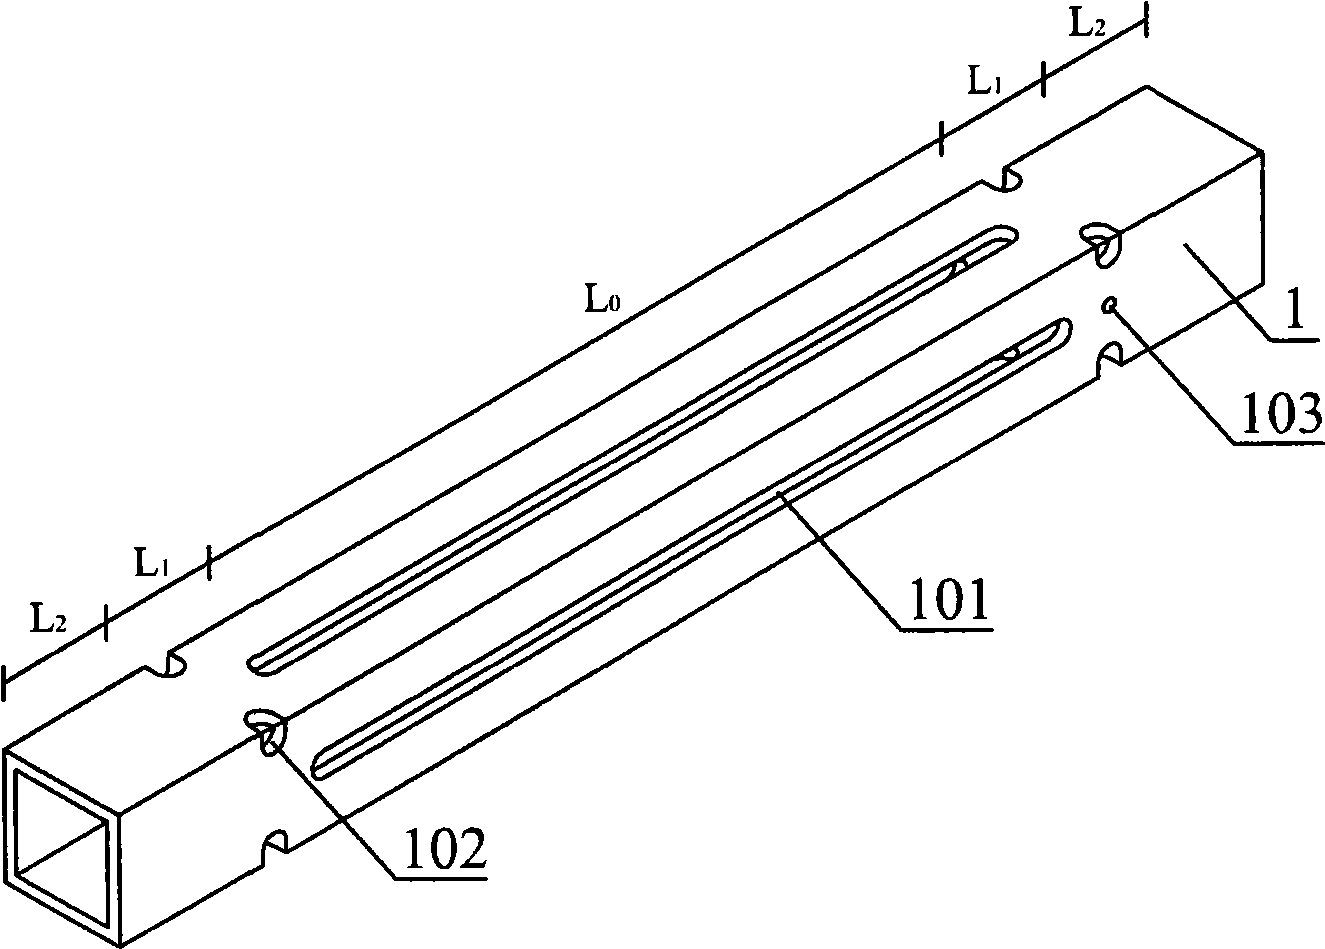 Triple-level metal rectangular pipe flection restriction support energy-dissipation device